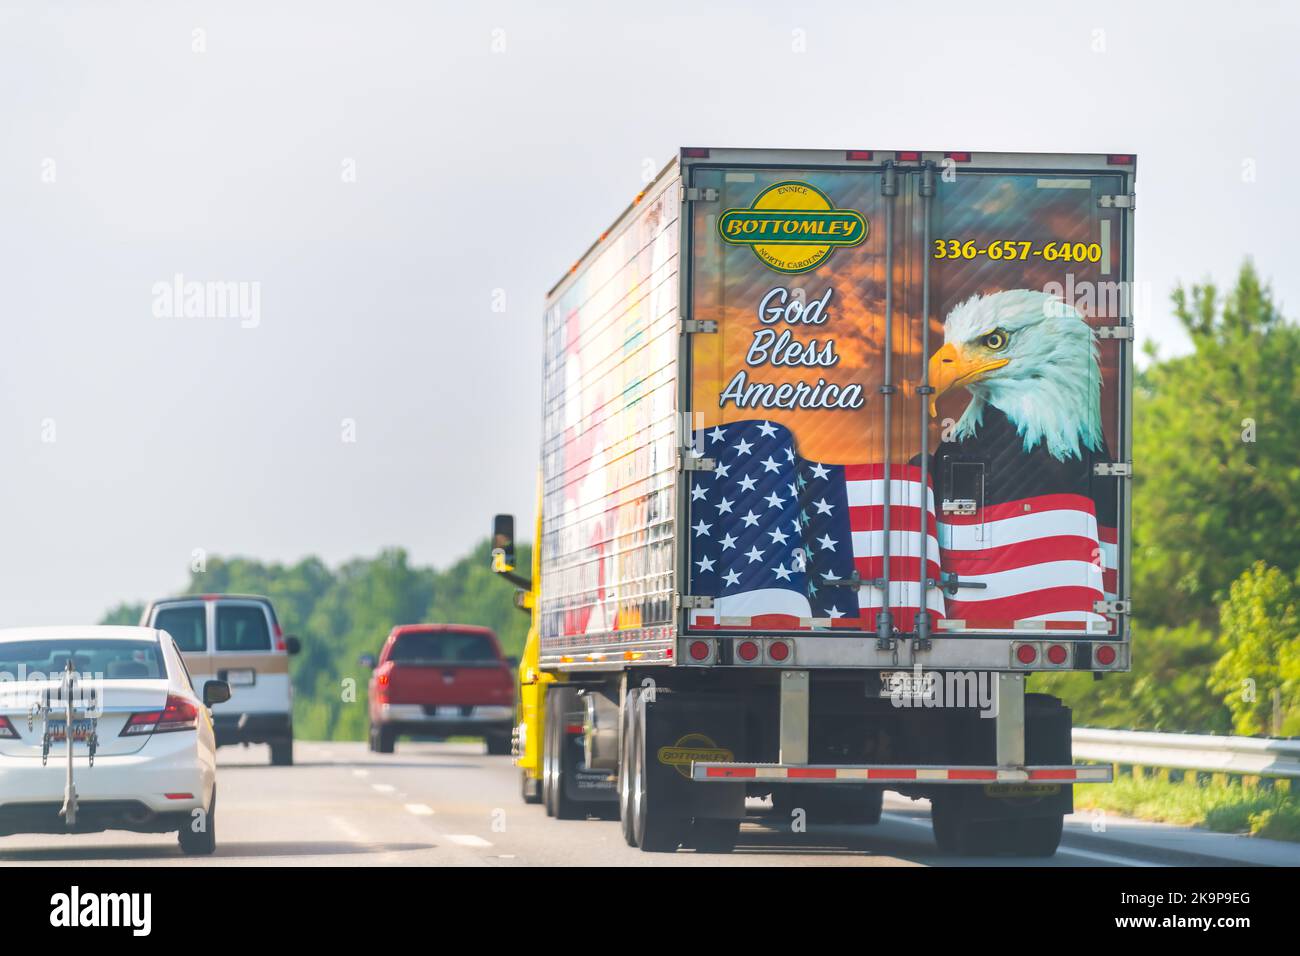 Marion, USA - July 6, 2021: Bottomley Enterprises refrigerated truck delivering cargo freight shipment on interstate highway road in North Carolina Stock Photo